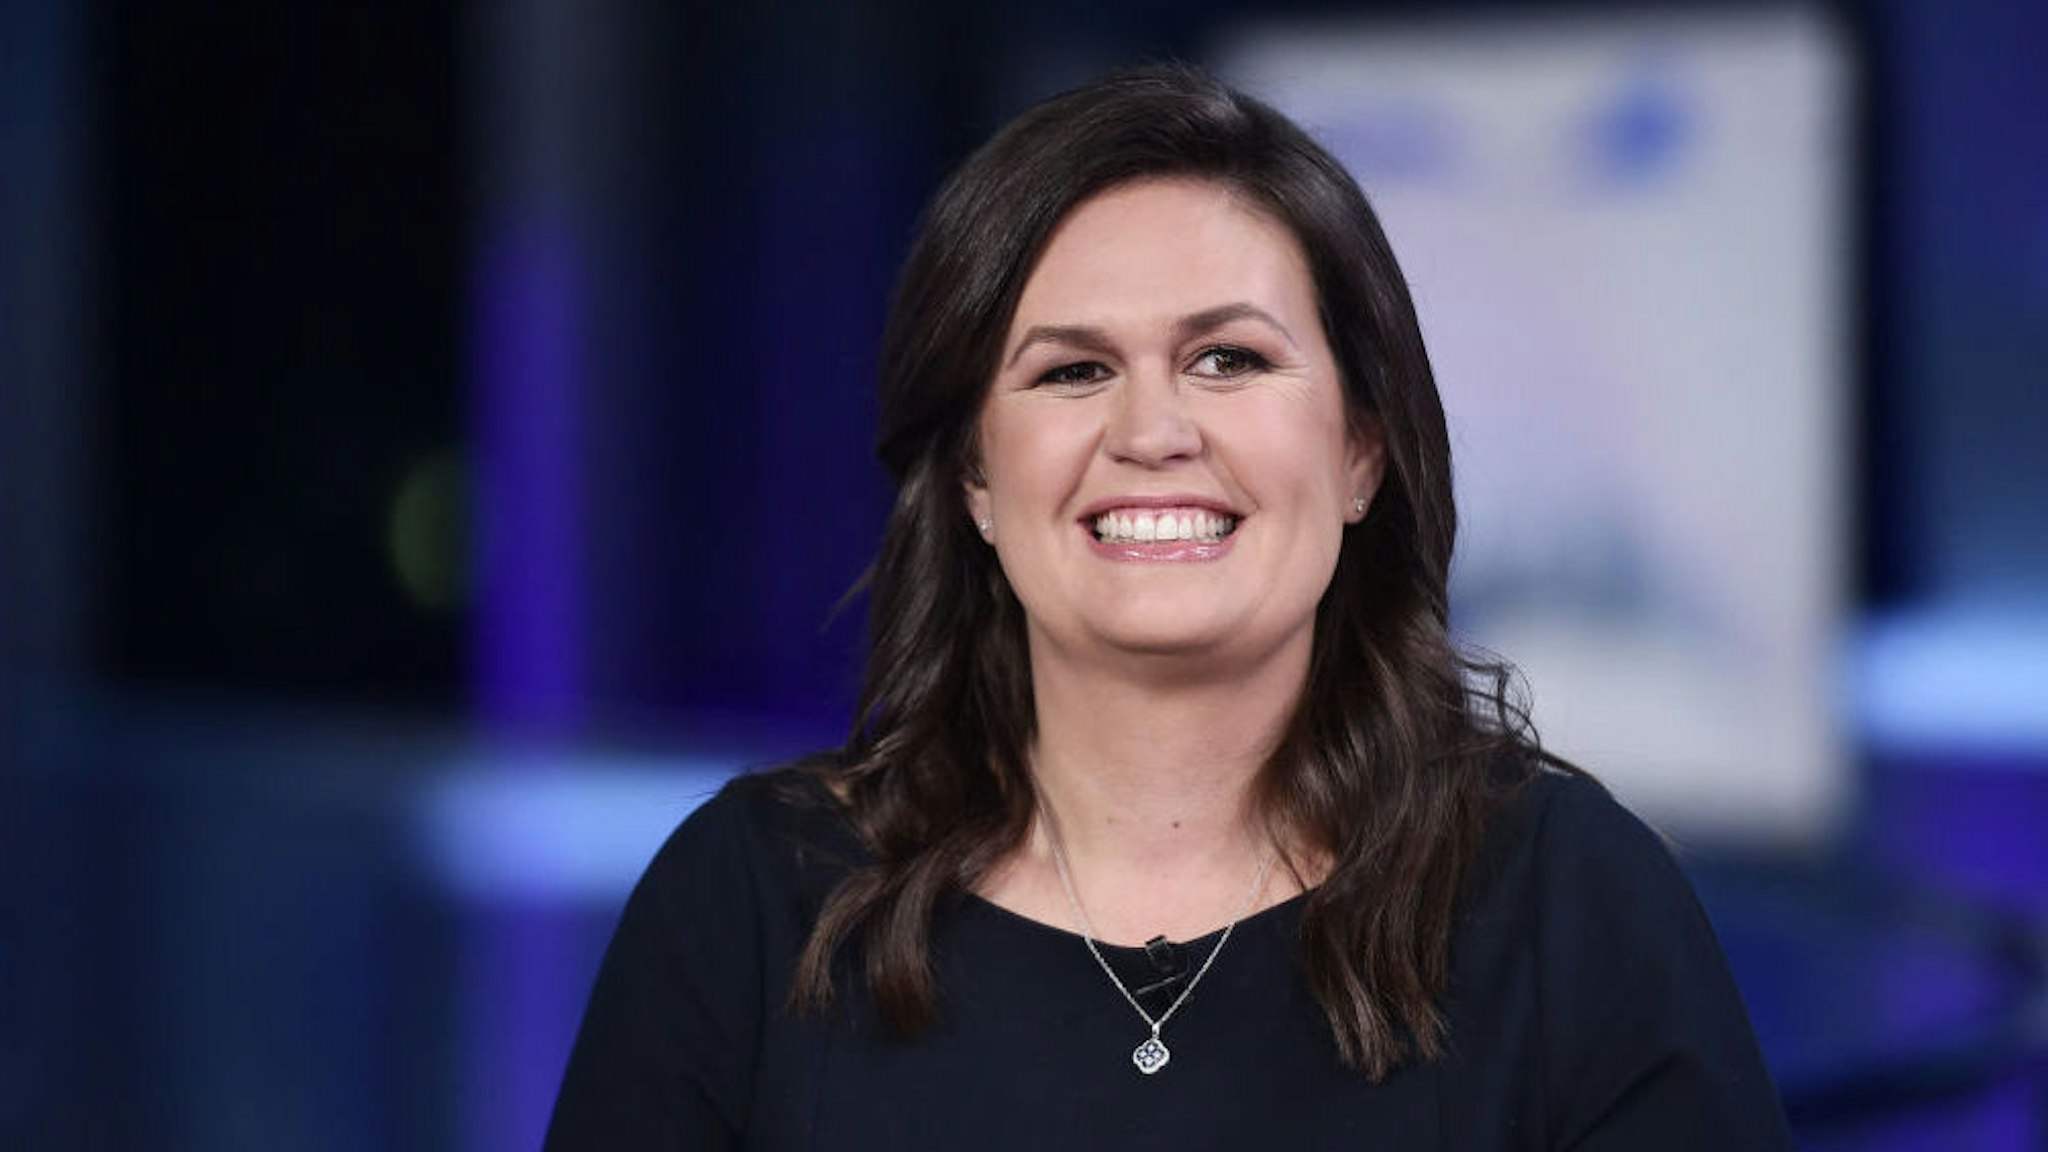 FOX News Contributor Sarah Huckabee Sanders visit "The Story with Martha MacCallum" on September 17, 2019 in New York City. (Photo by Steven Ferdman/Getty Images)